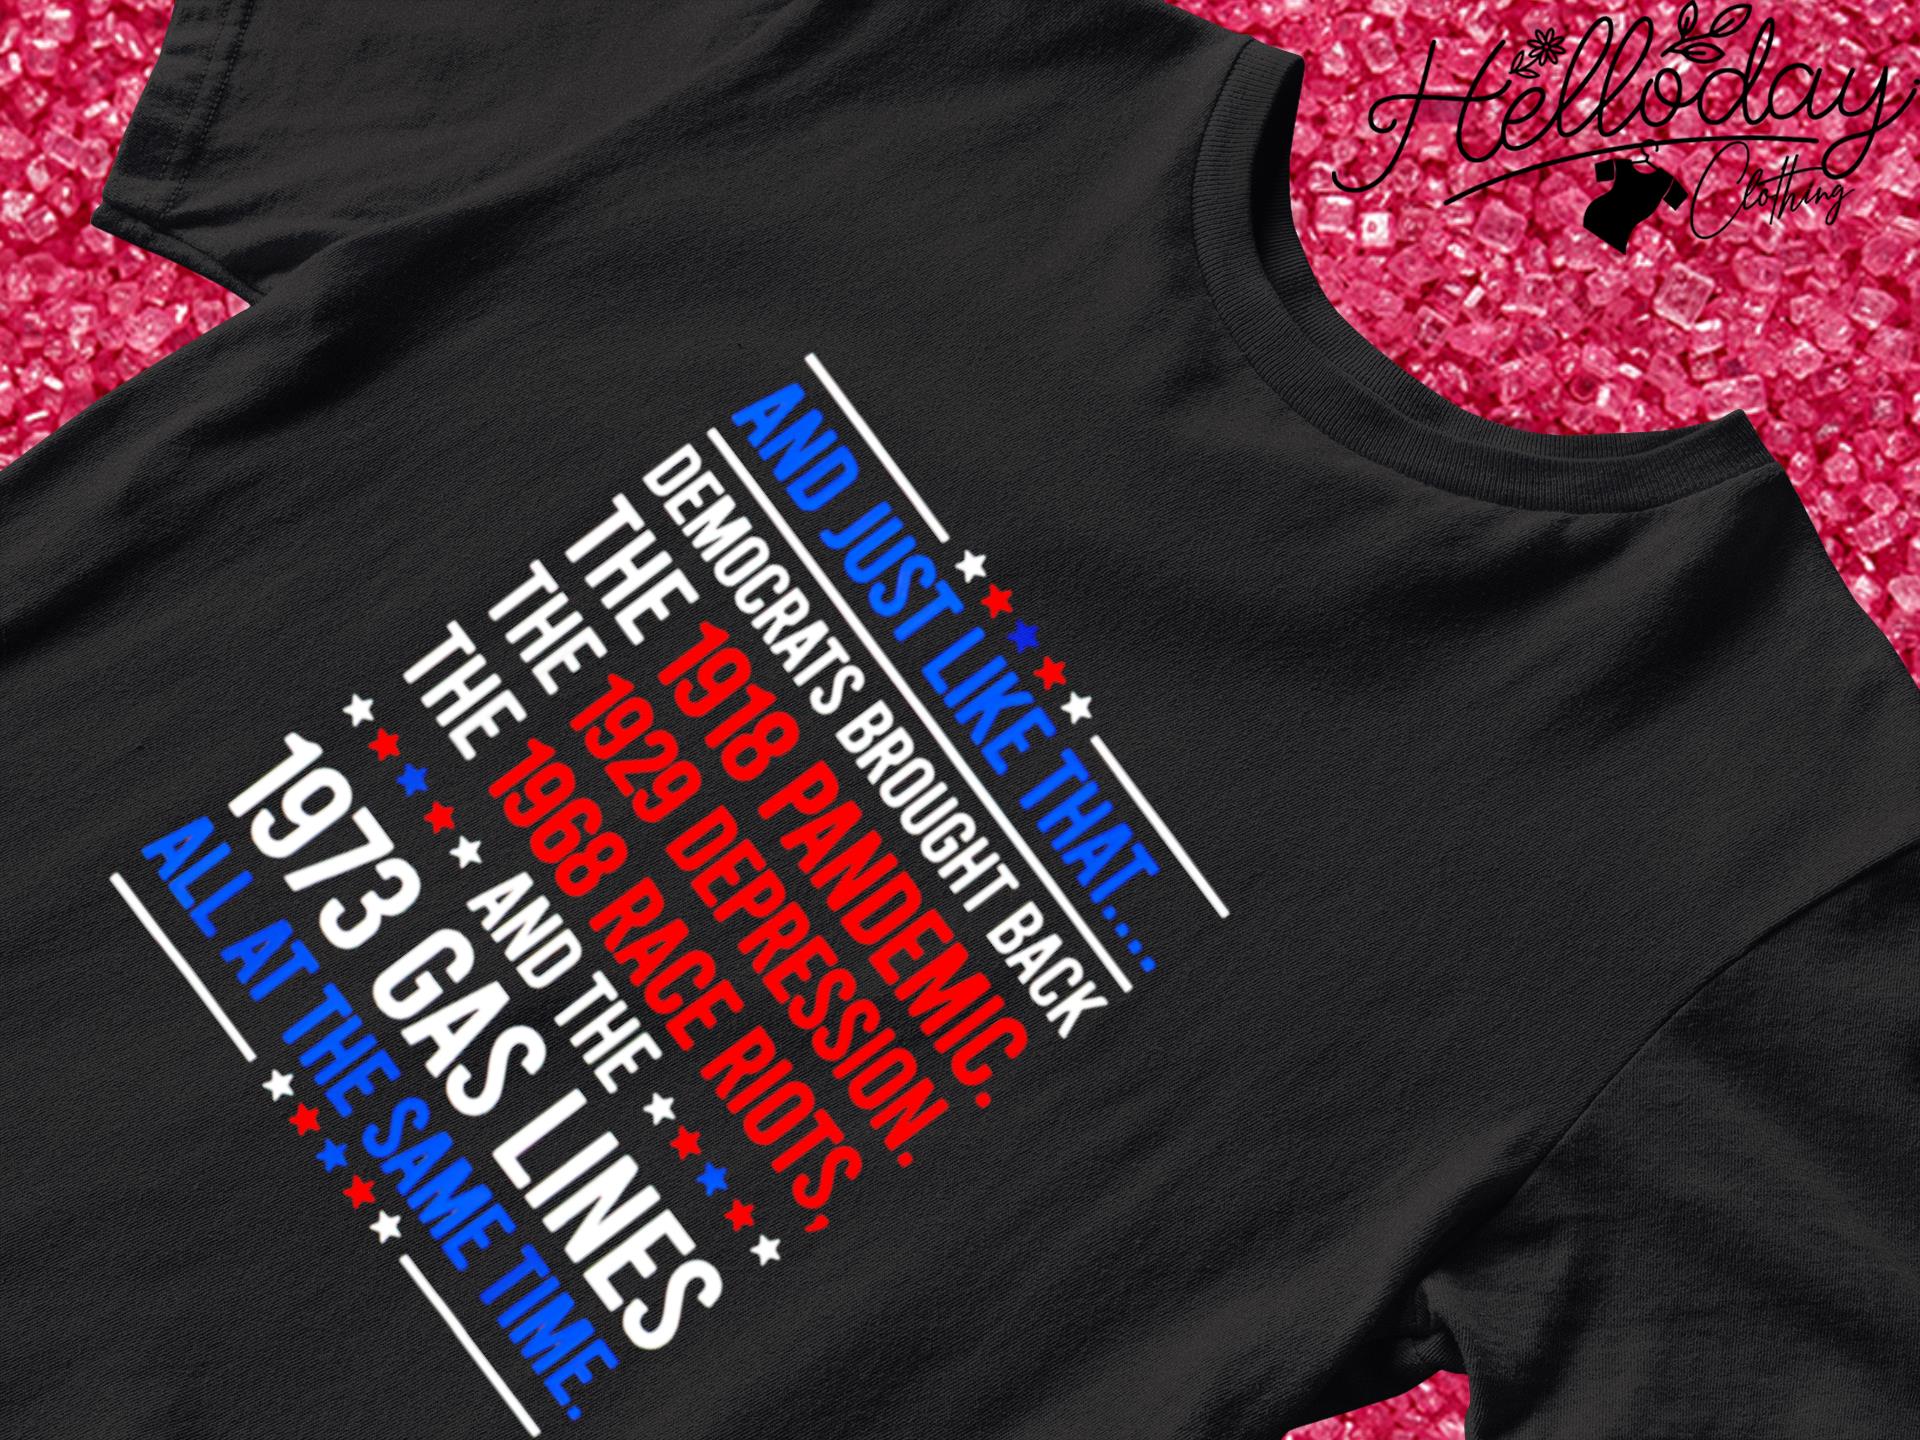 Just like that democrats brought back all at the same time T-shirt